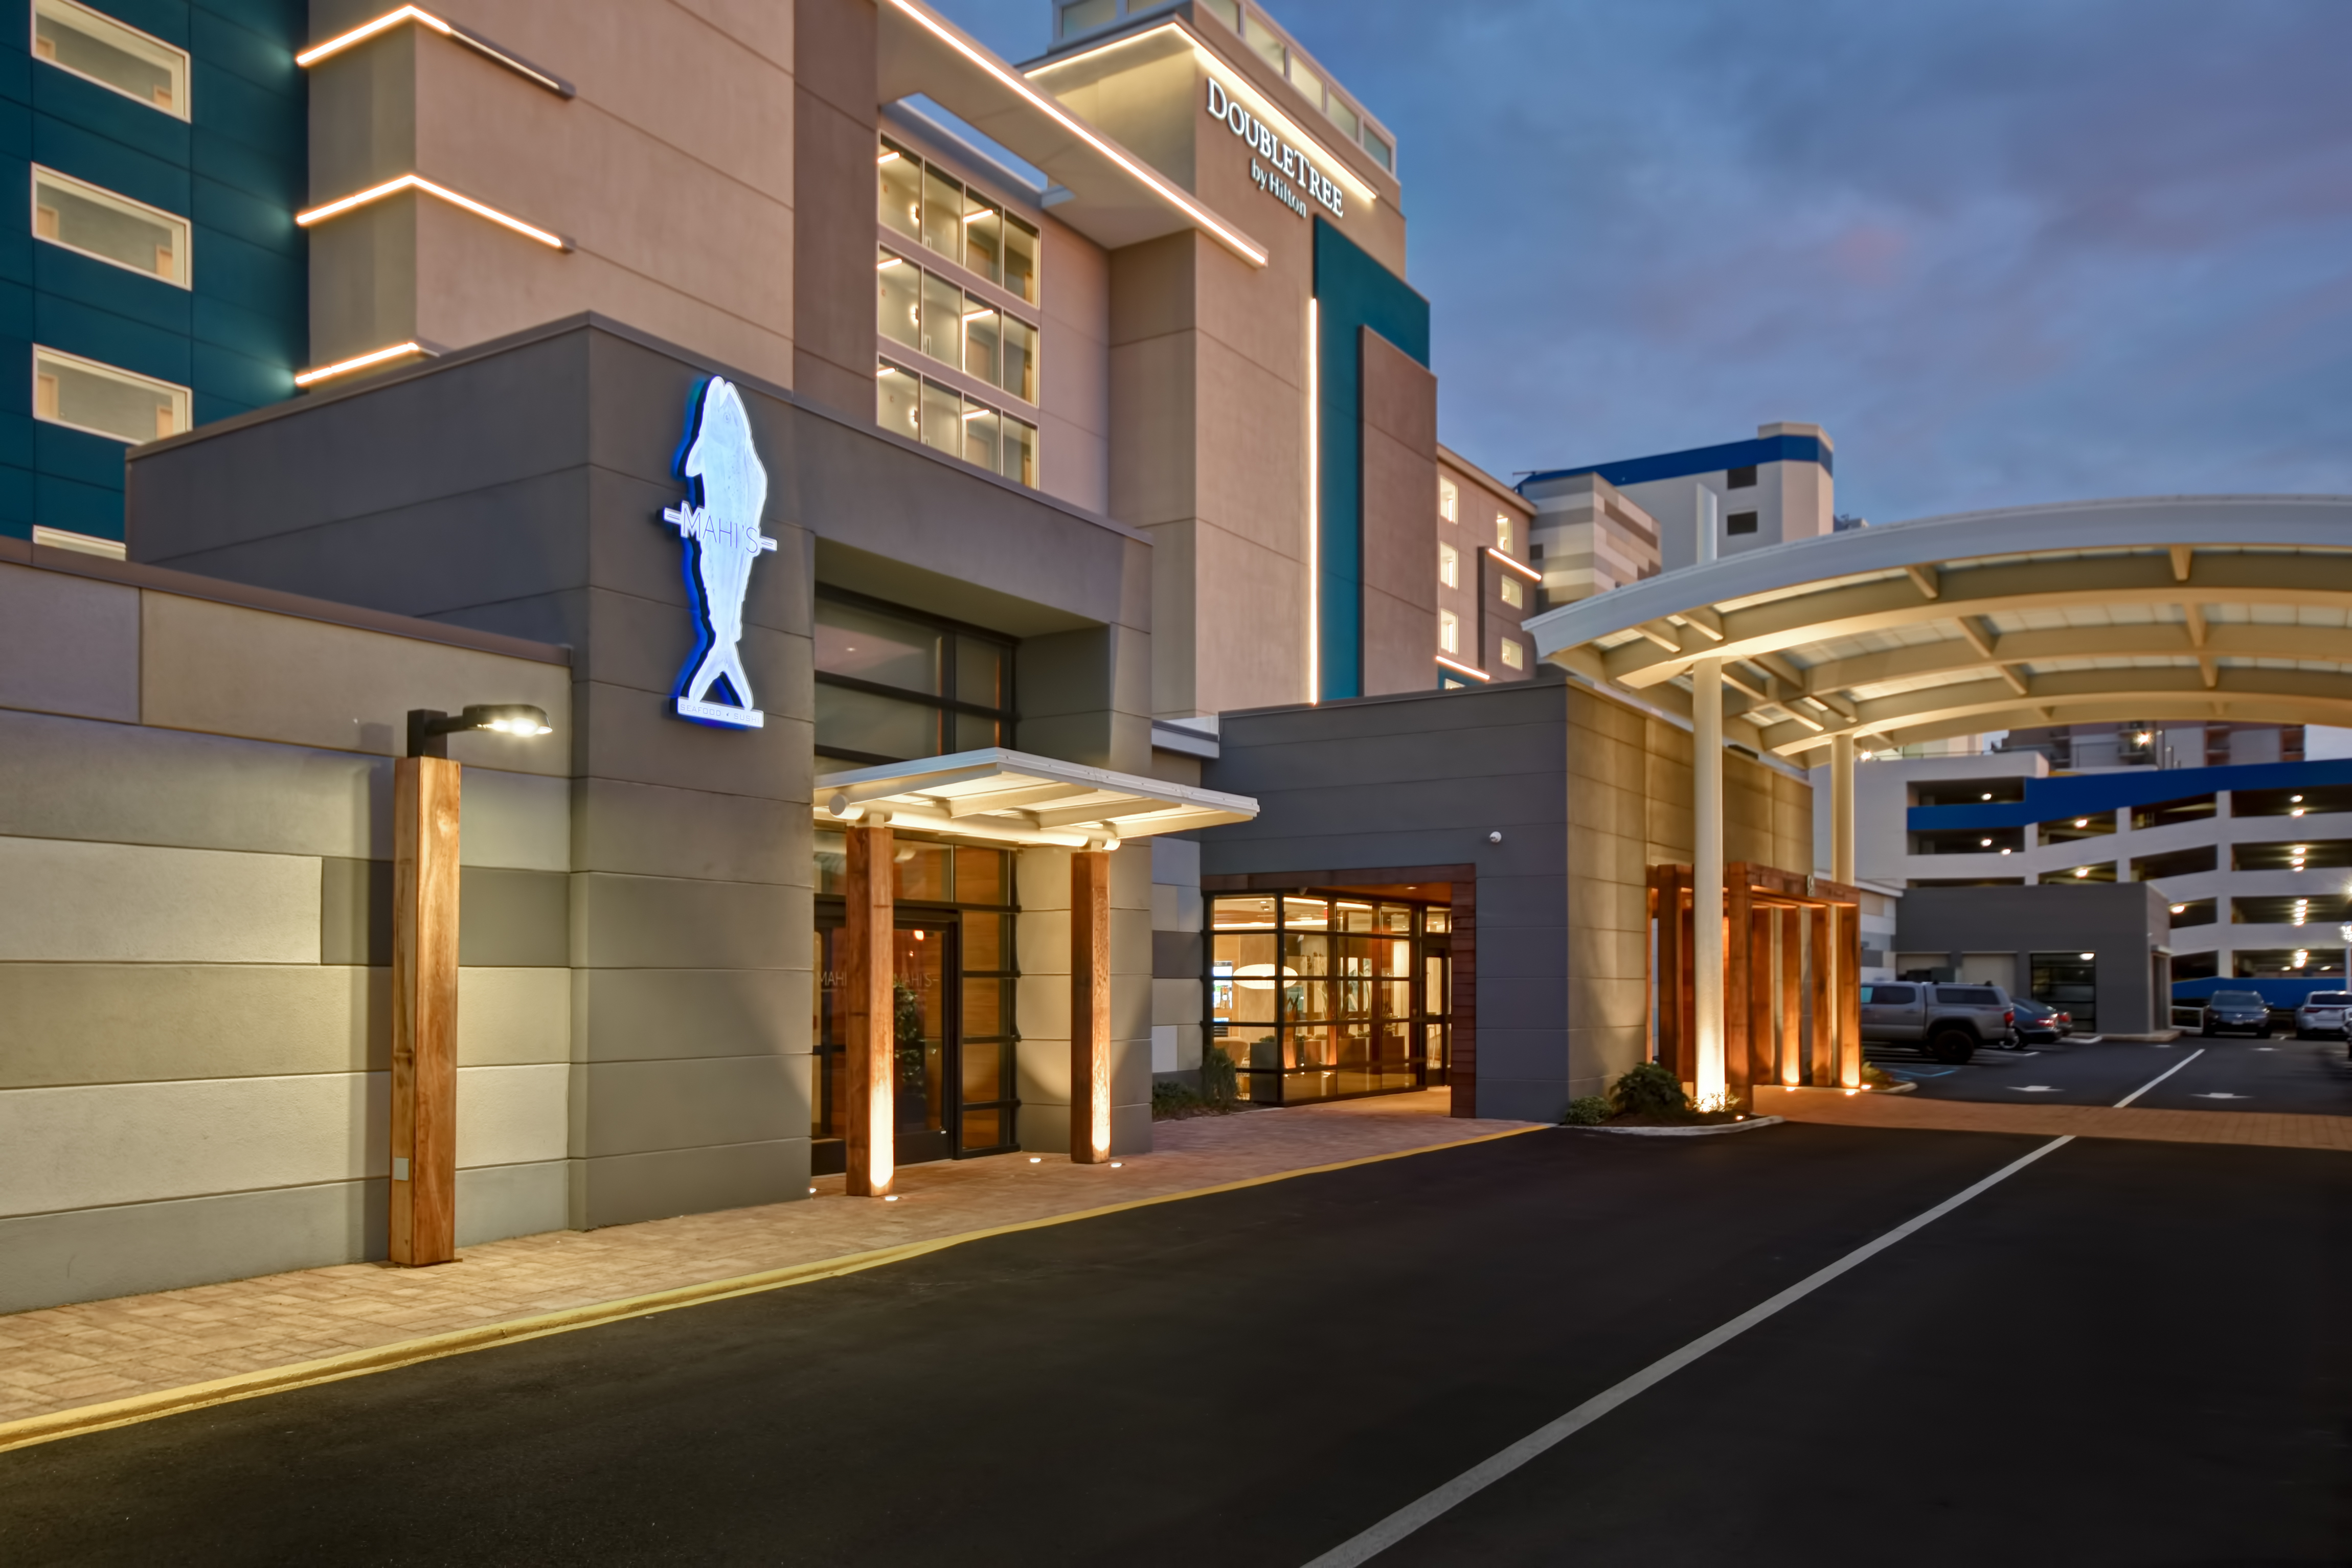 Hotel exterior and entrance